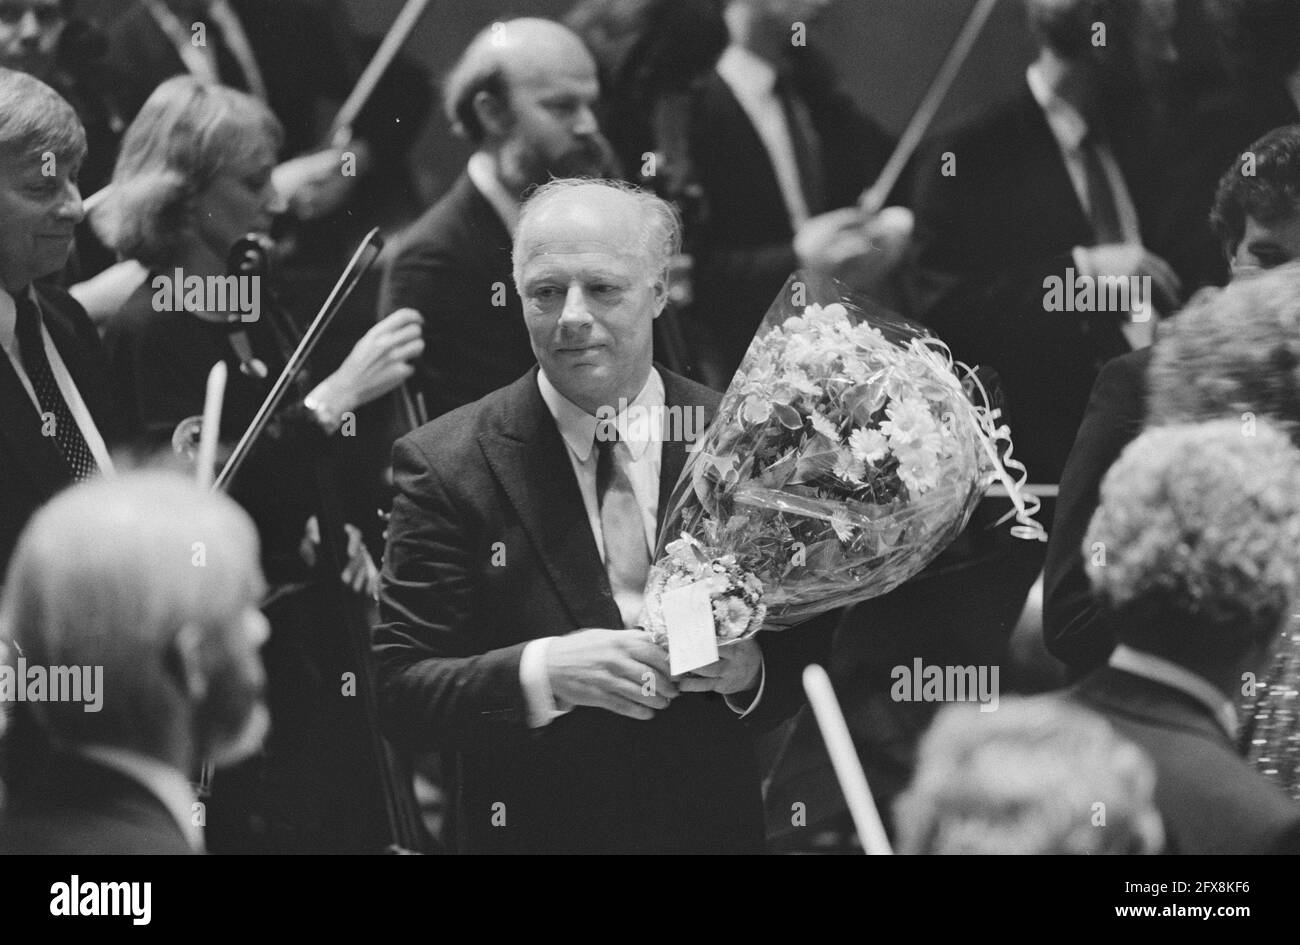 Bernhard Haitink takes leave as chief conductor of Concertgebouw Orchestra; Bernhard Haitink, April 17, 1988, FAREWELL, FLOWS, conductors, orchestras, The Netherlands, 20th century press agency photo, news to remember, documentary, historic photography 1945-1990, visual stories, human history of the Twentieth Century, capturing moments in time Stock Photo